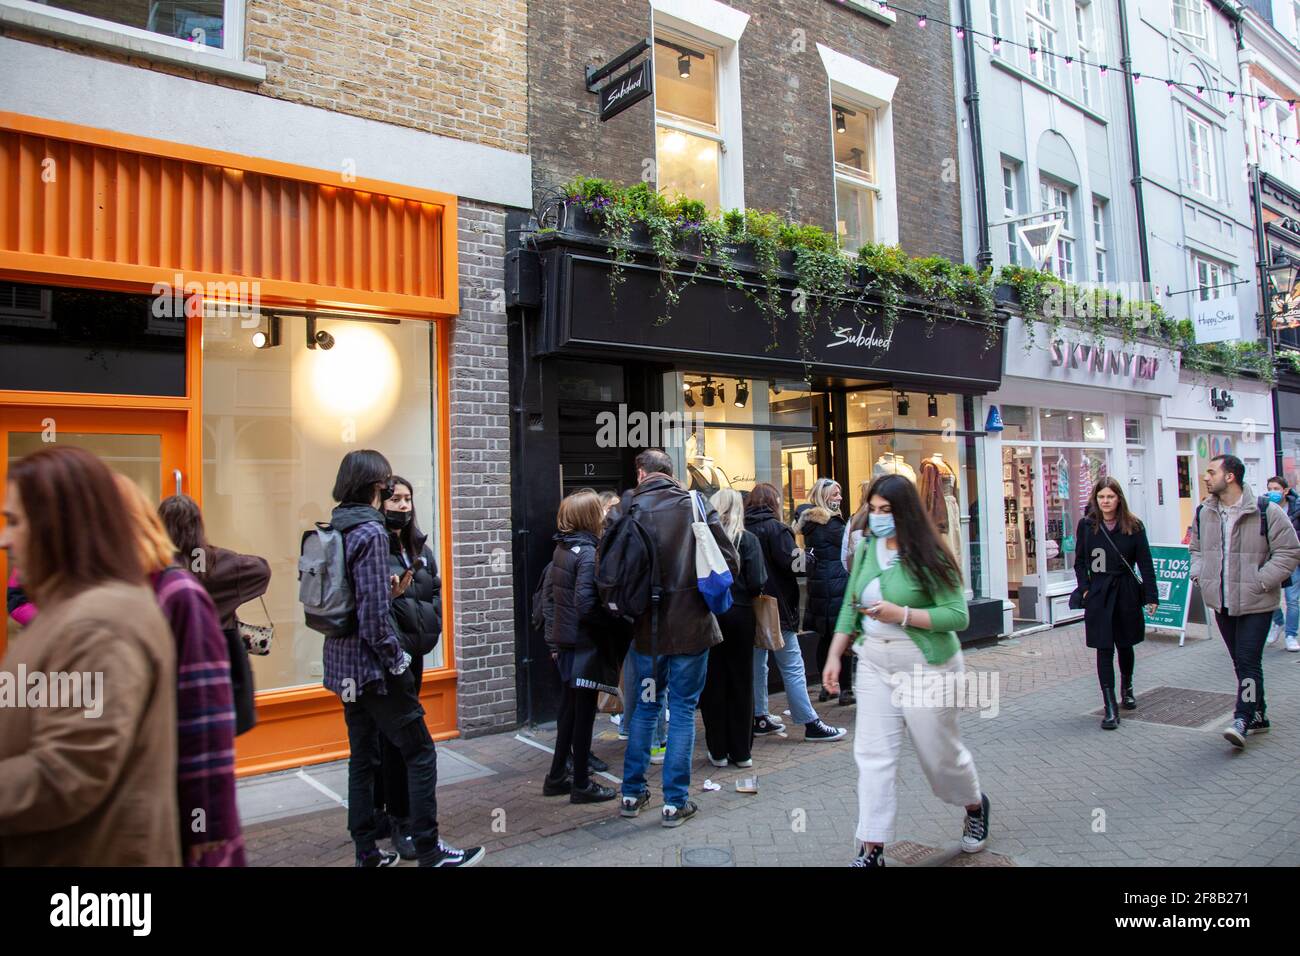 First Day after Lockdown, 12 April 2021, Shoppers Queue to Enter Boutique on Carnaby Street, London, W1 - London UK Stock Photo